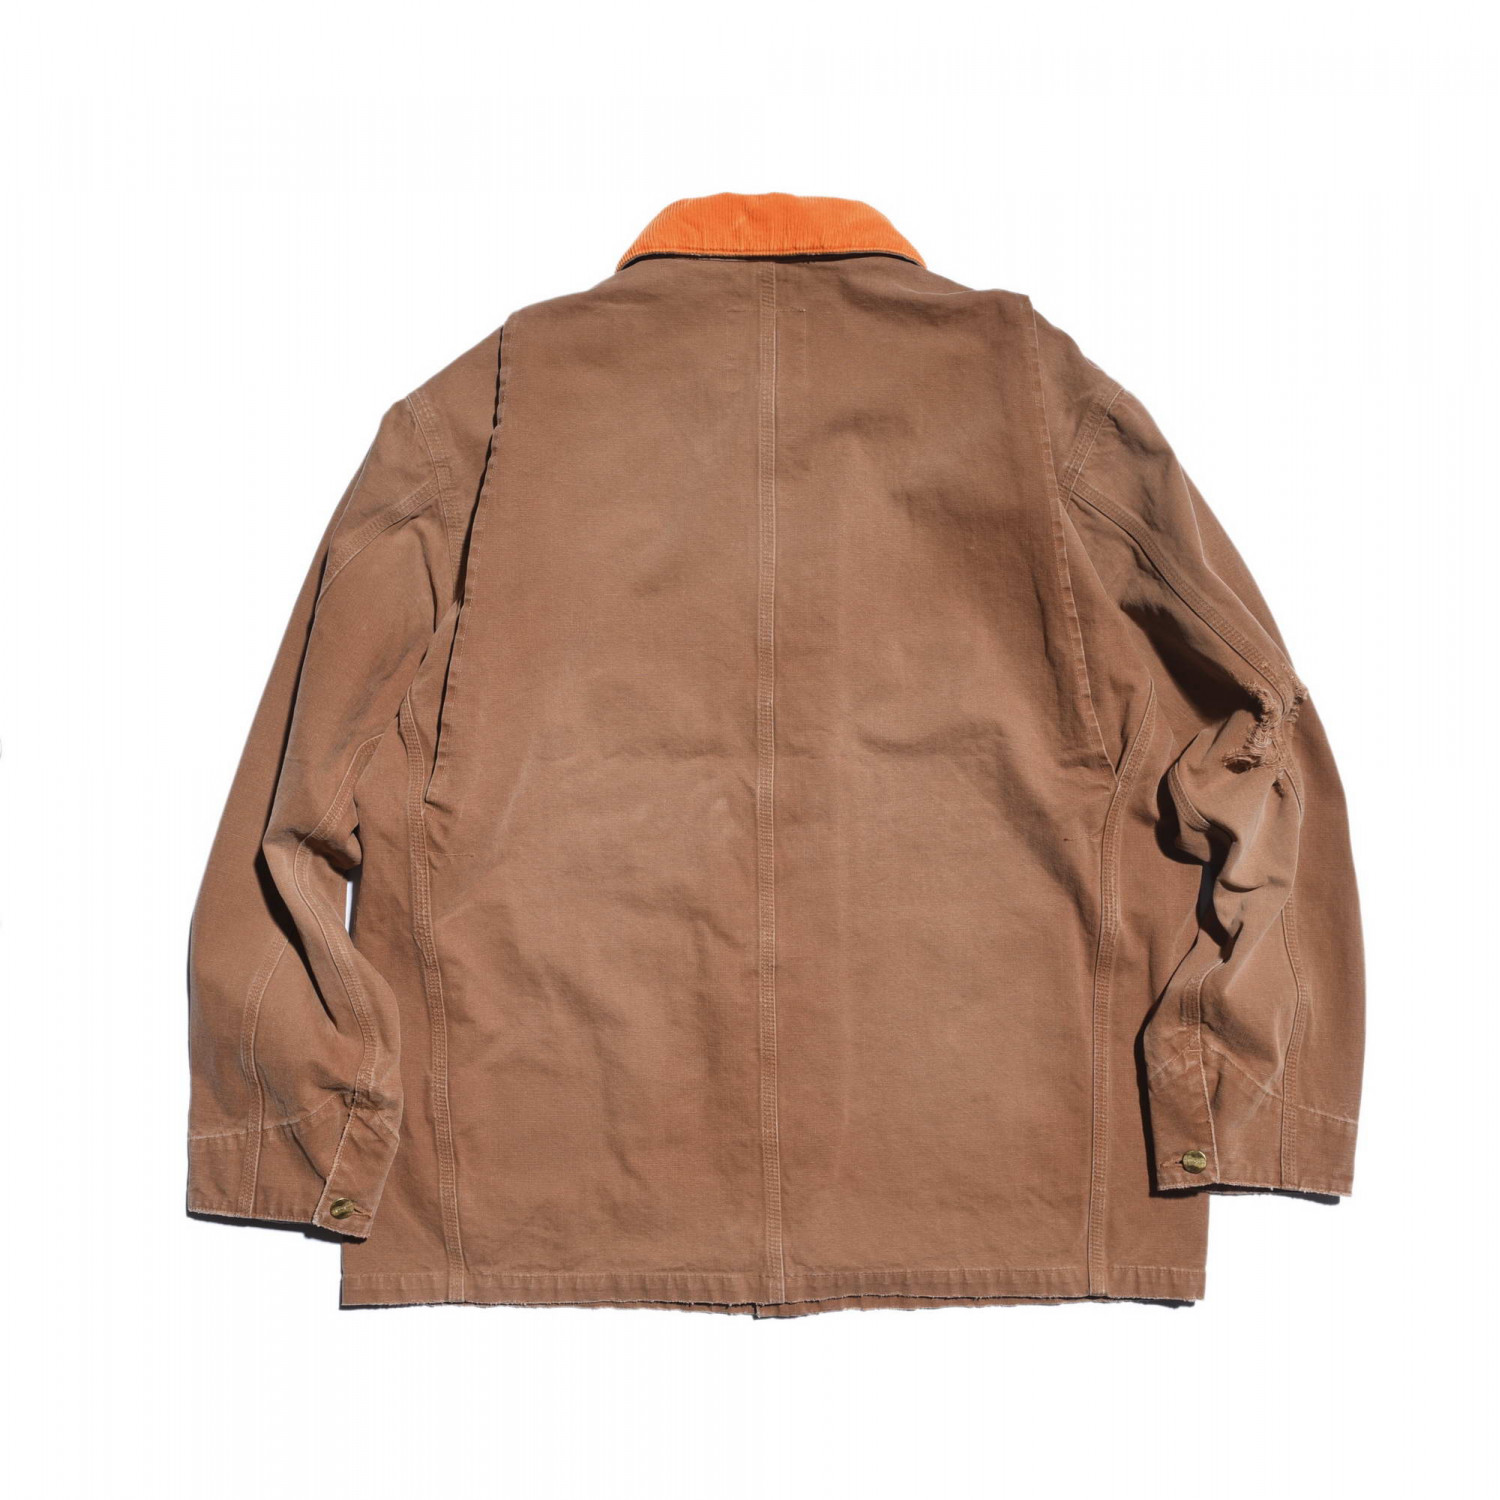 MADNESS x CARHARTT WIP FIFTH RECONSTRUCTED MICHIGAN COAT | MADNESS